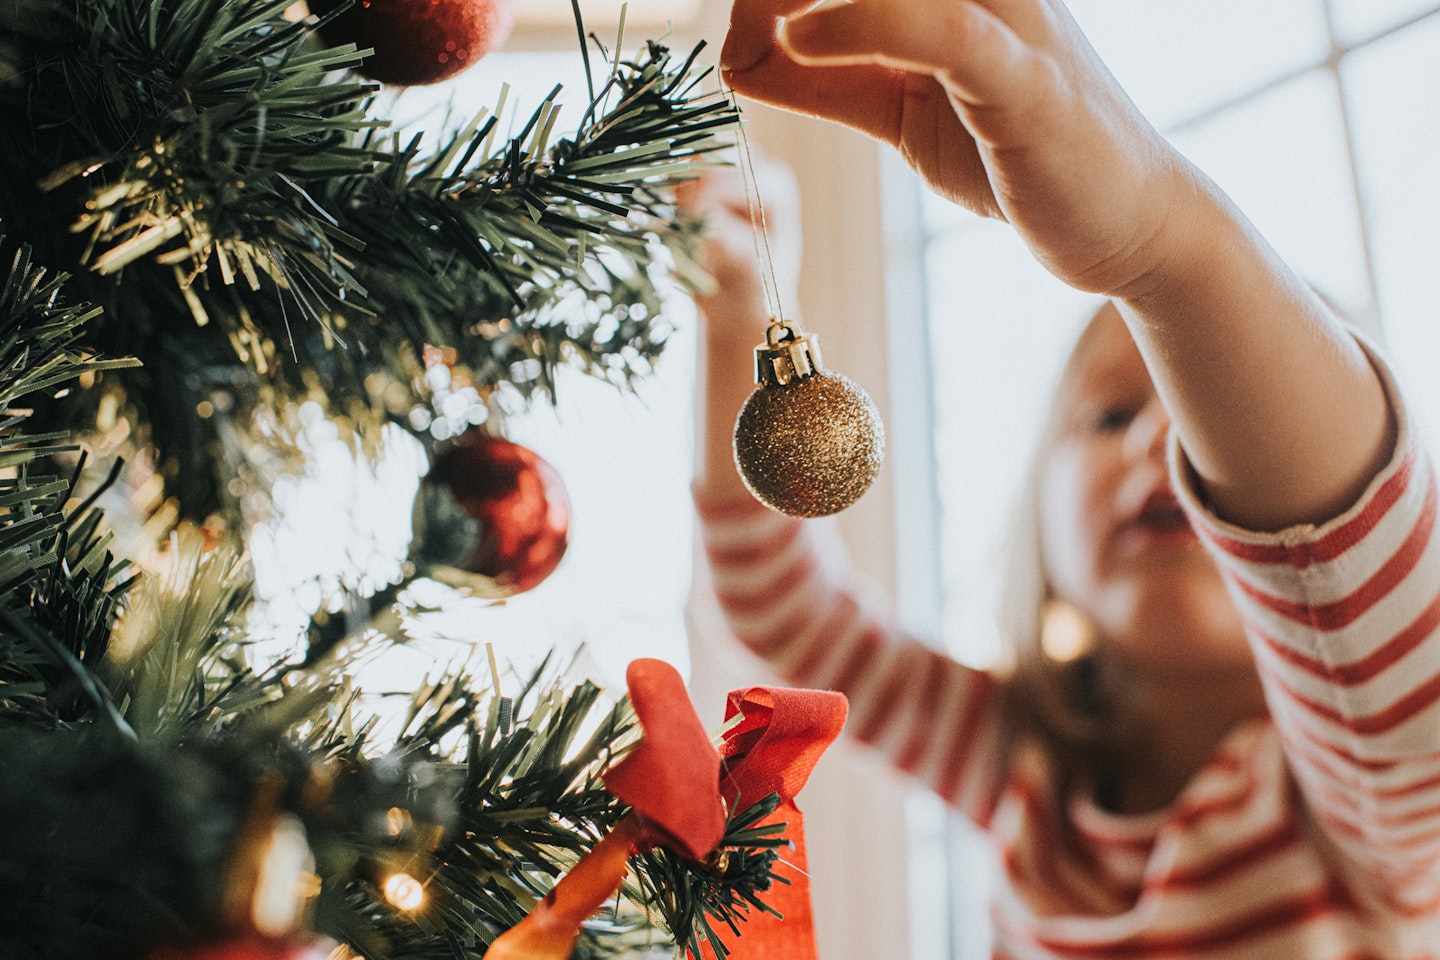 Child placing bauble on tree